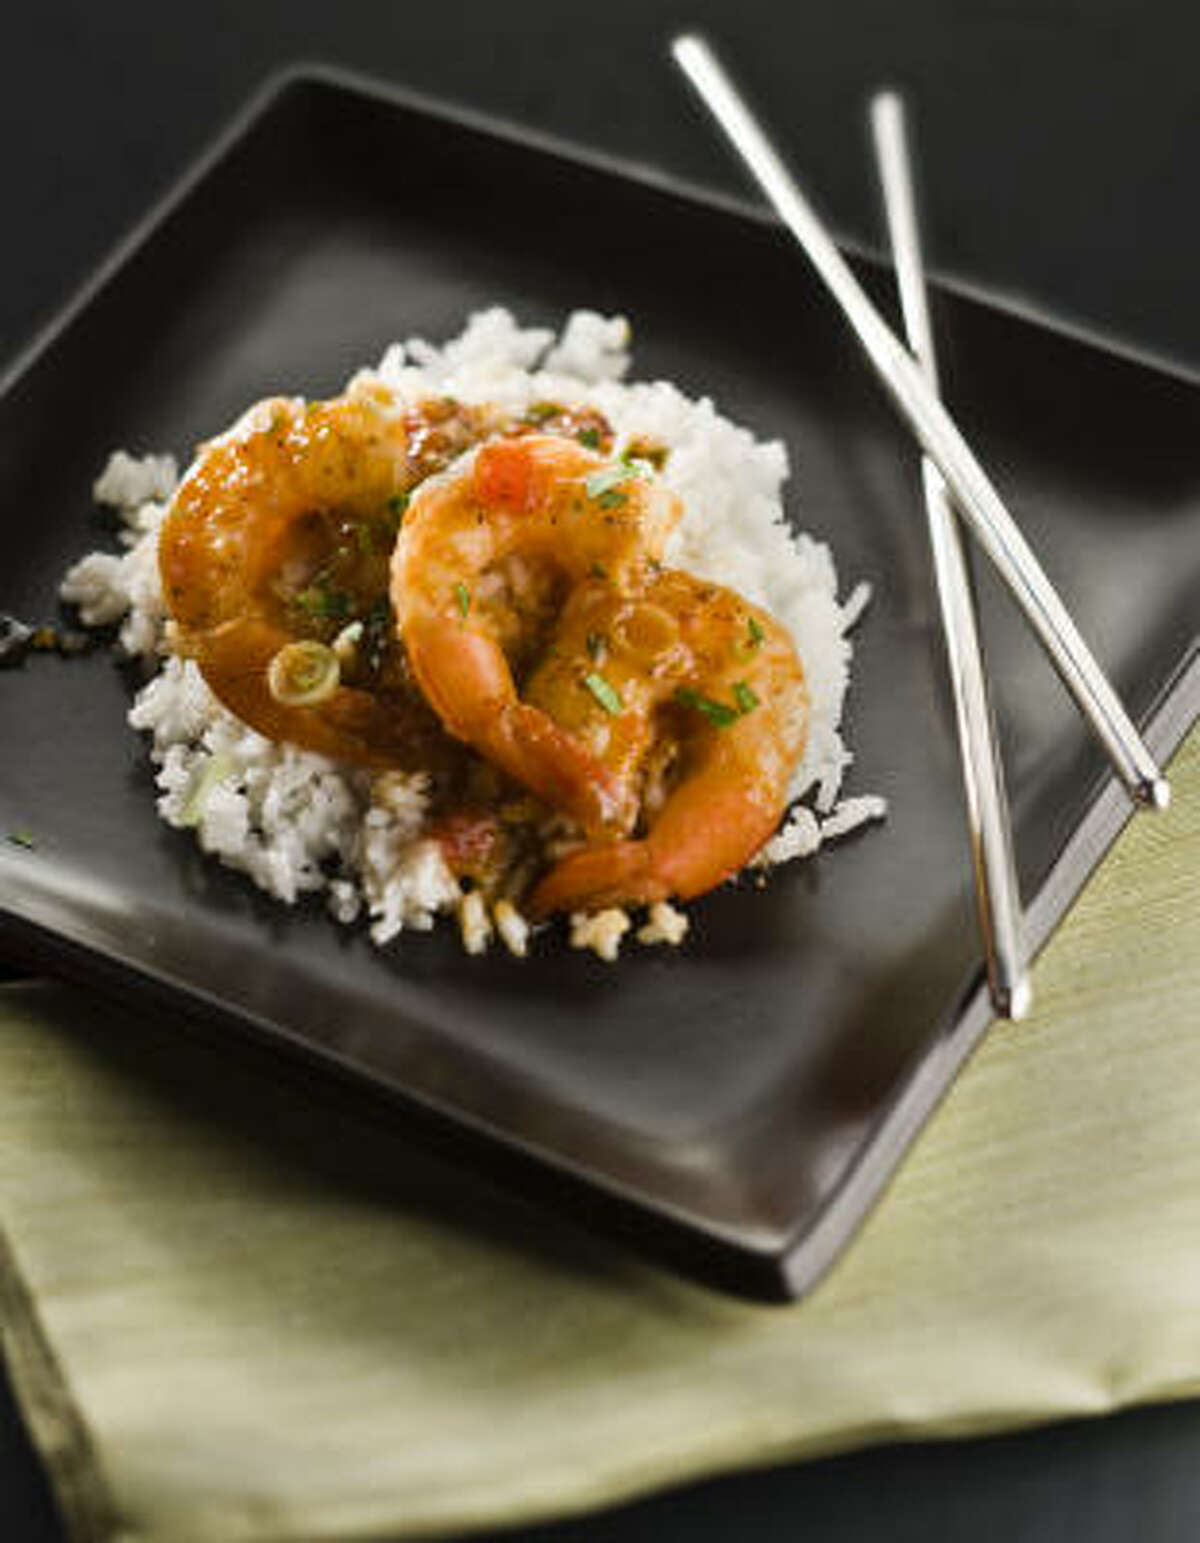 Shrimp is one of the safer types of seafood in terms of mercury content.